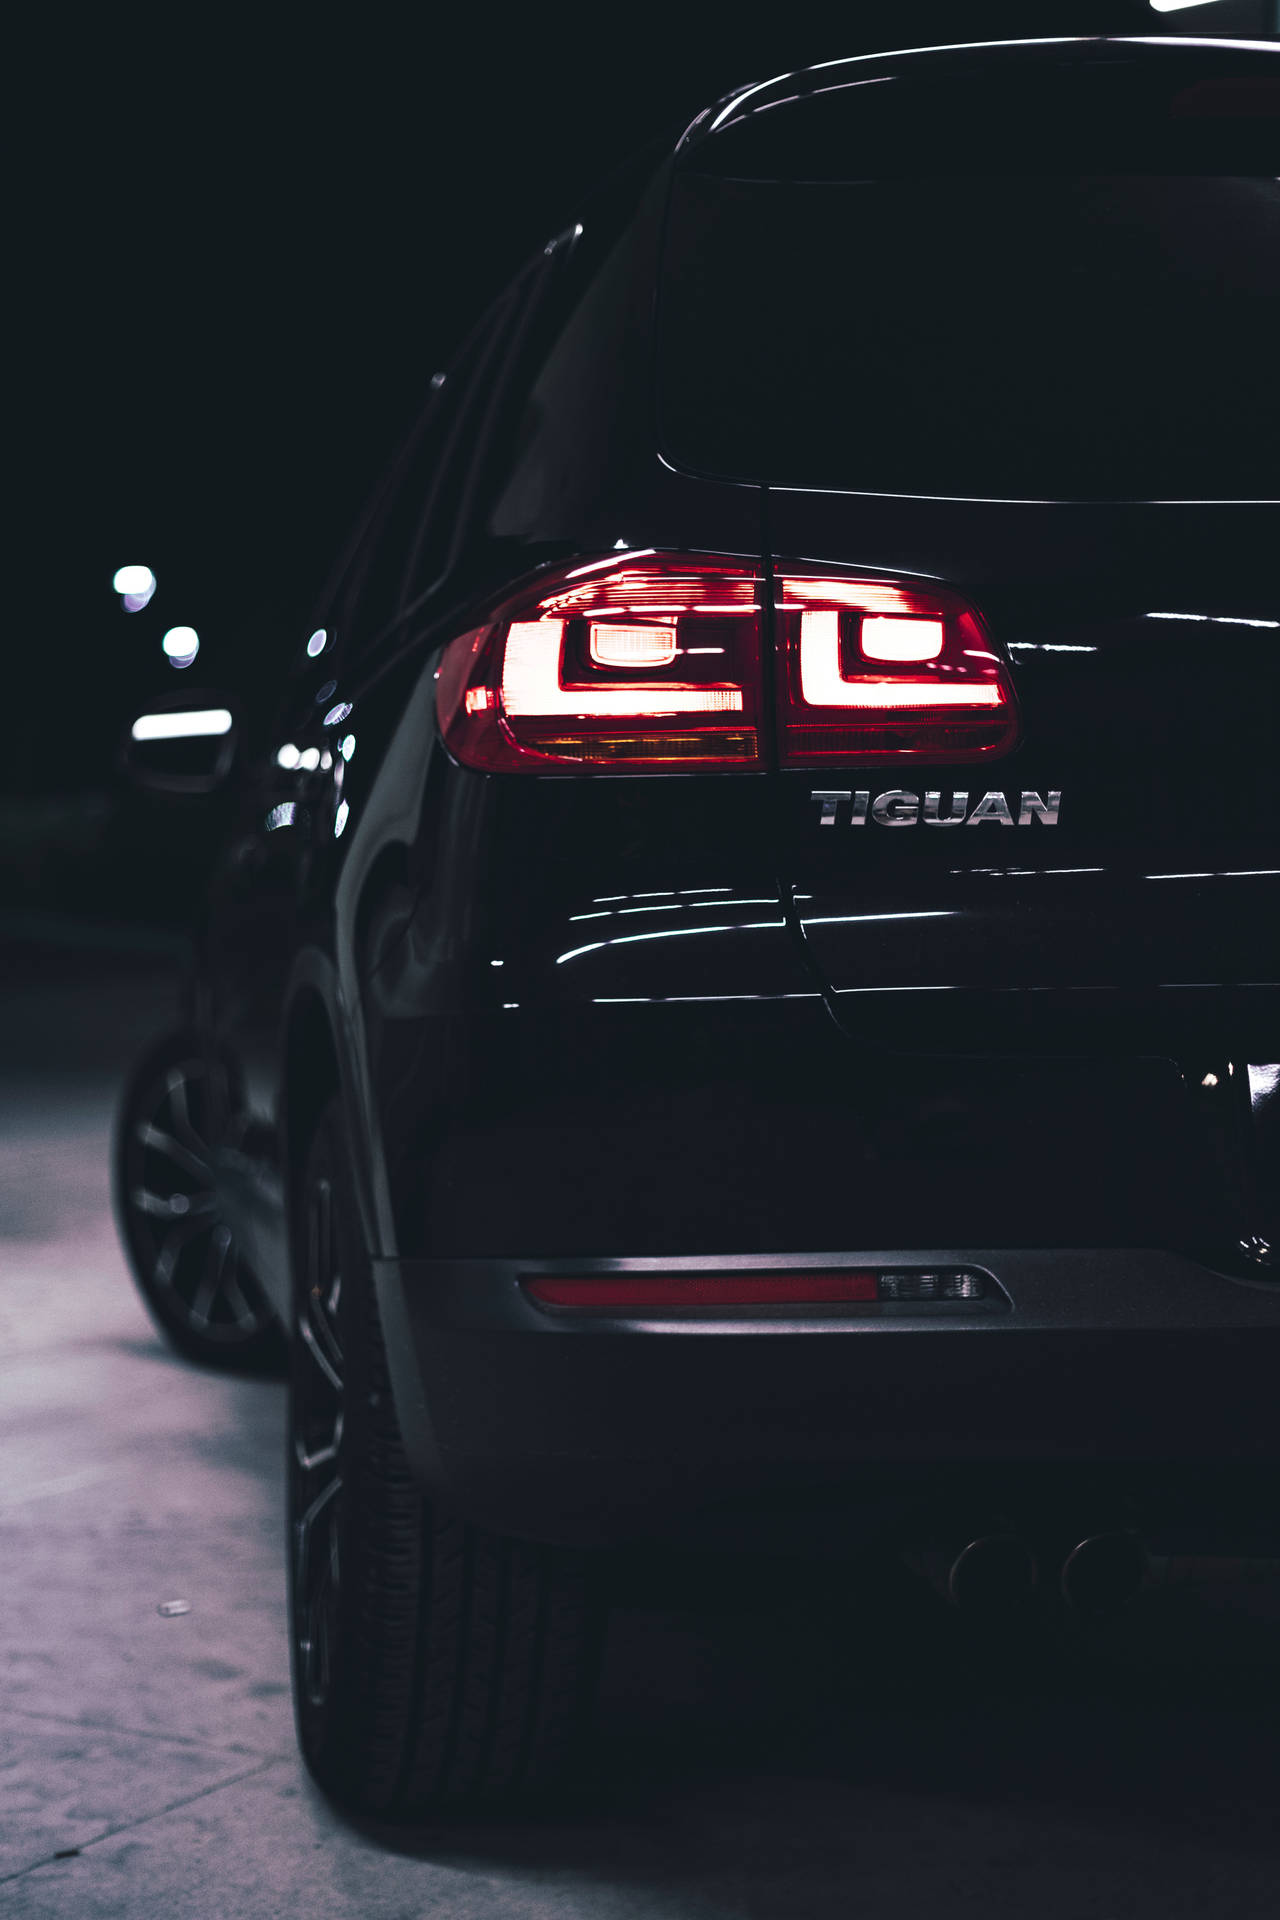 Volkswagen Tiguan - Ready for any journey Wallpaper